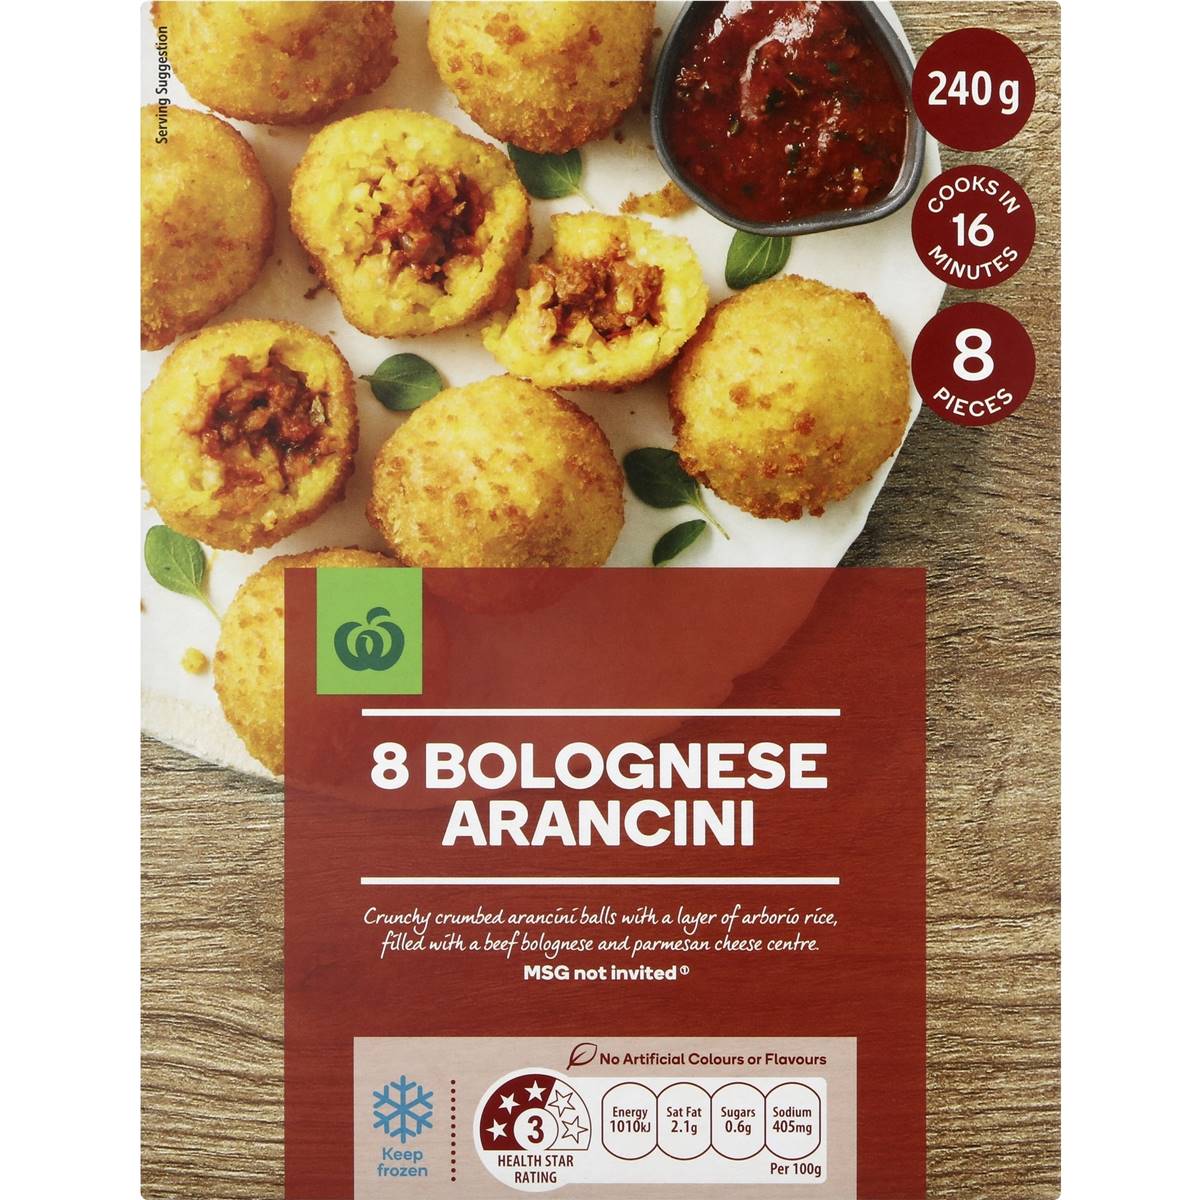 Calories in Woolworths Bolognese Arancini